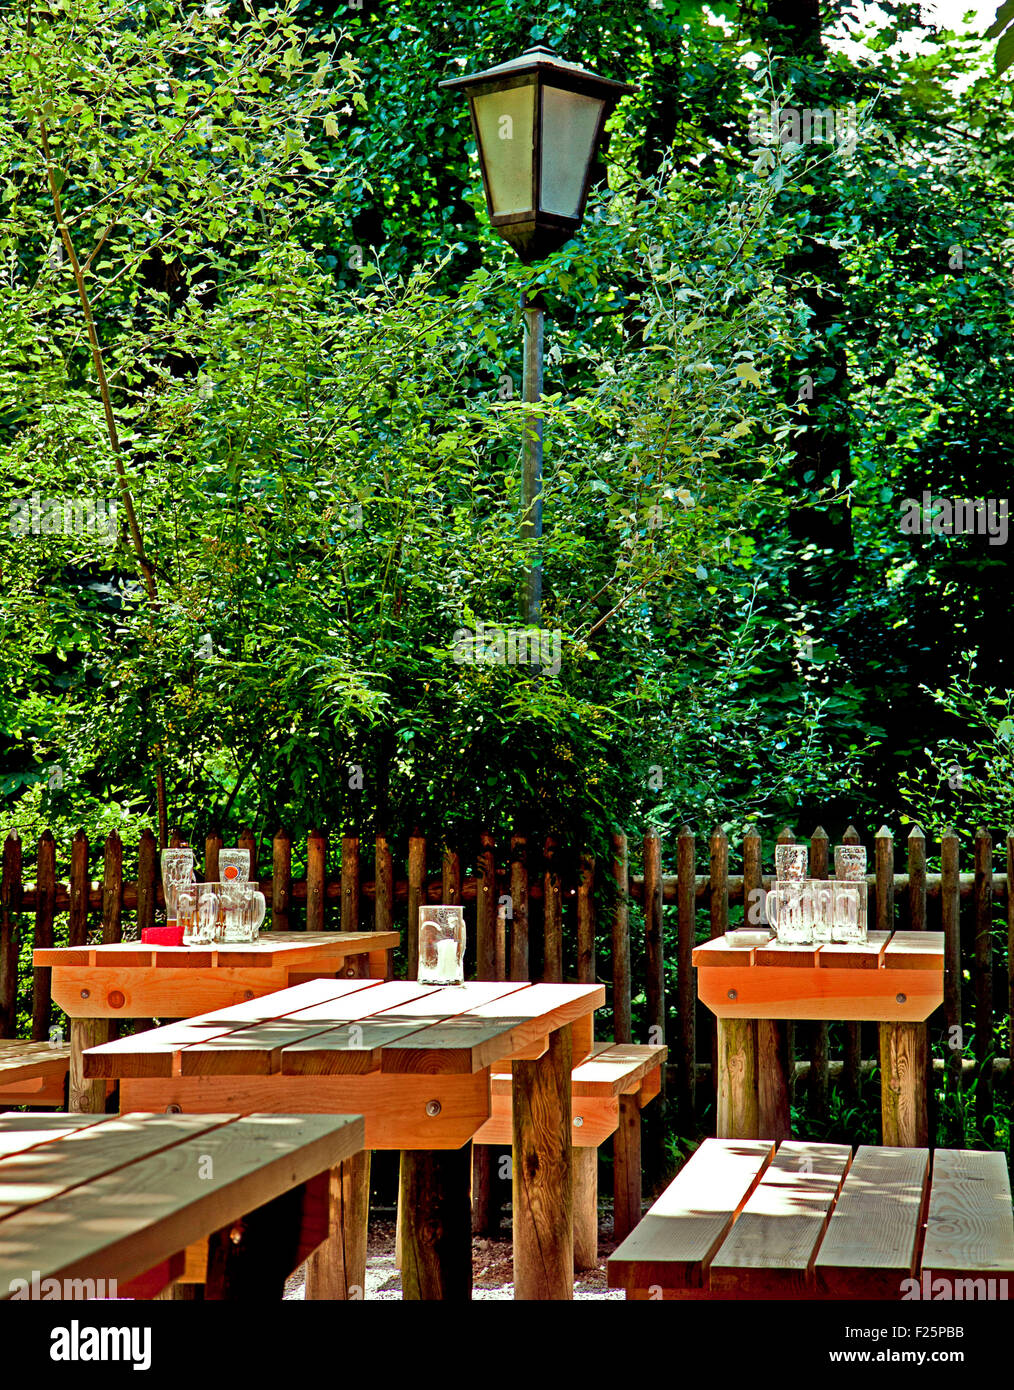 Munich, Germany - beer garden in a quiet moment at the end of a business day with empty beer glasses on wooden benches Stock Photo